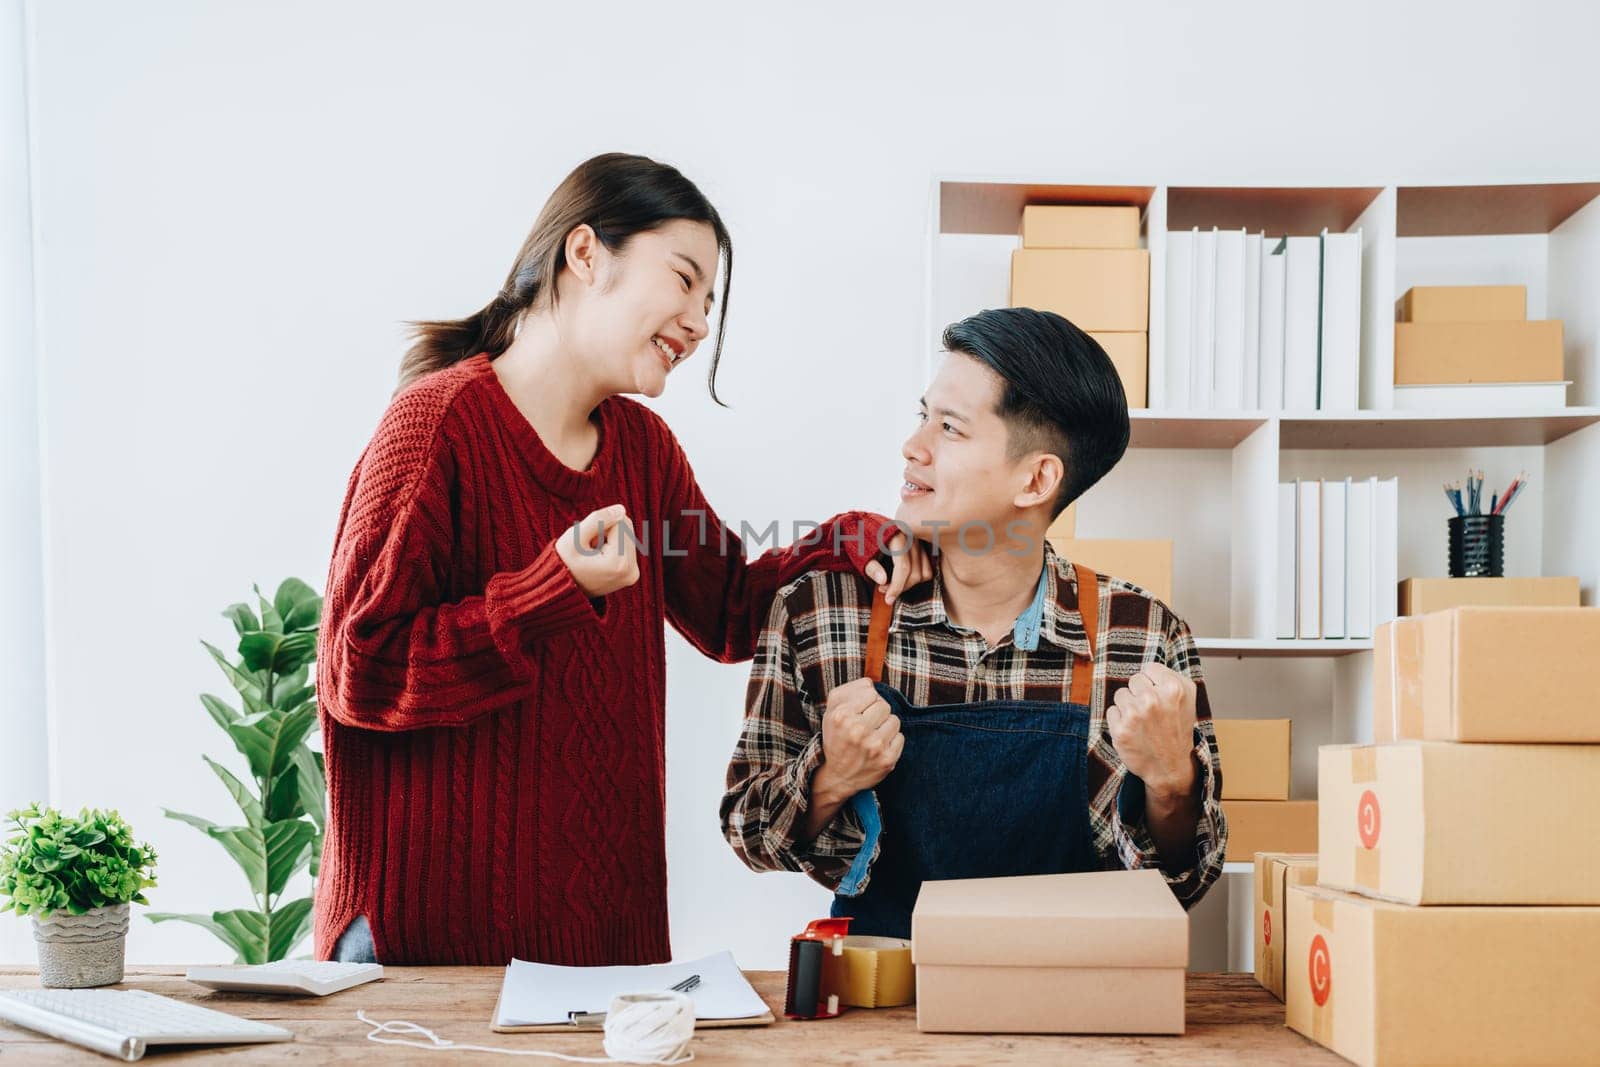 A young Asian couple shows delight and smiles on their faces when they see the sales volume and customer orders exceed expectations. sme or small business family concepts.